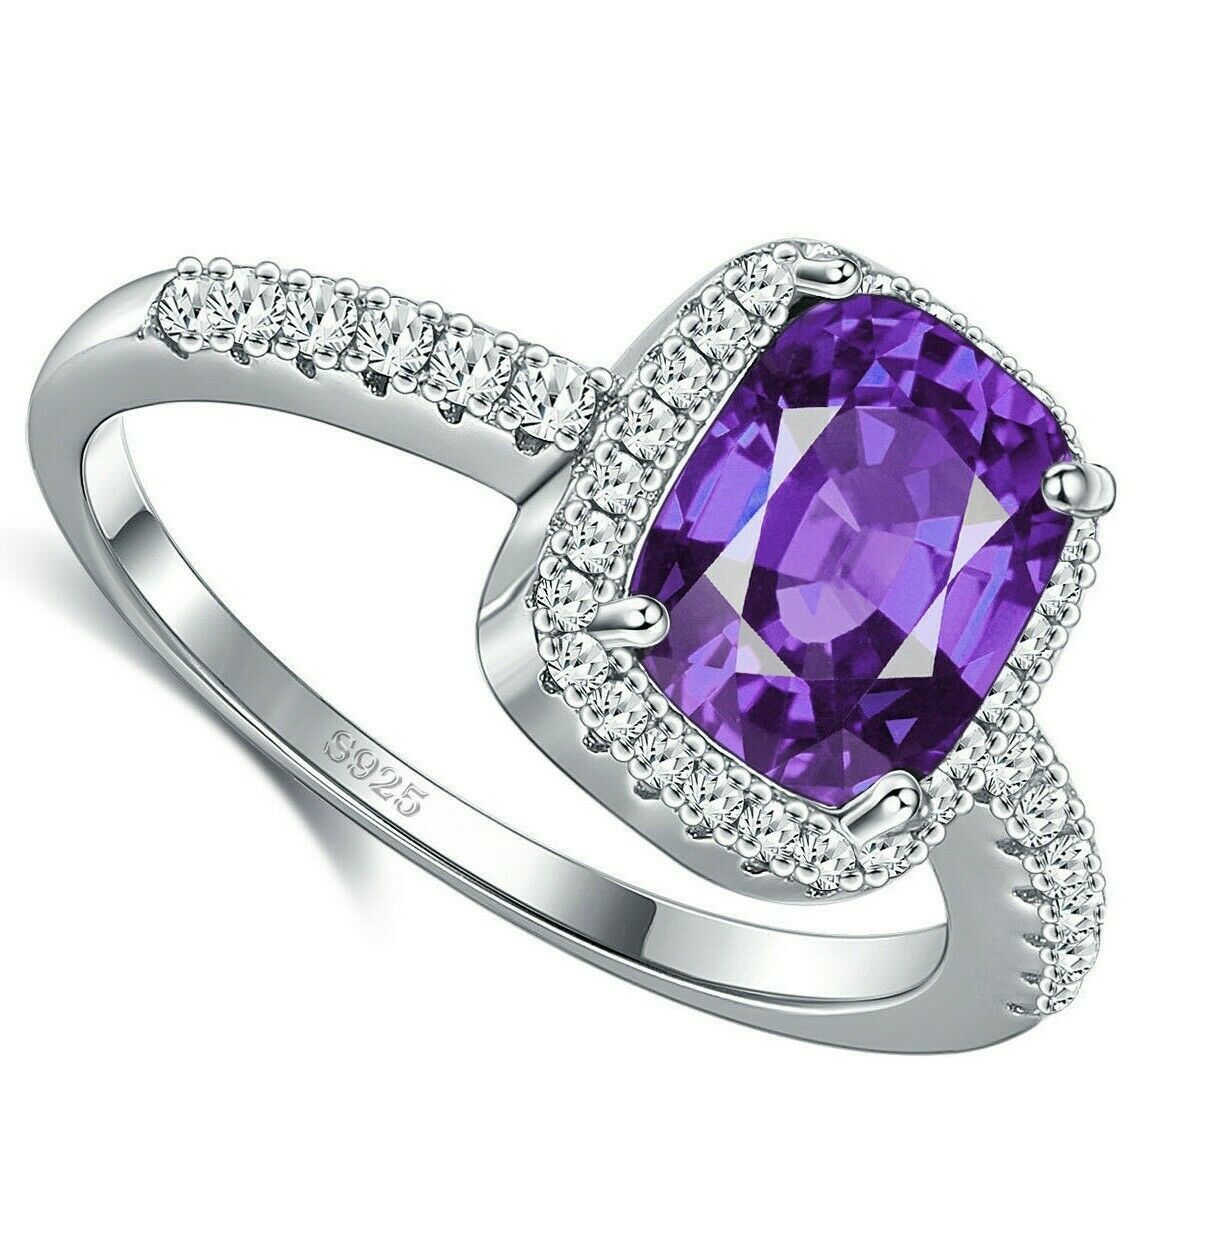 New . Silver Cushion Cut Amethyst Vintage Ring Size 7 - Great Gift